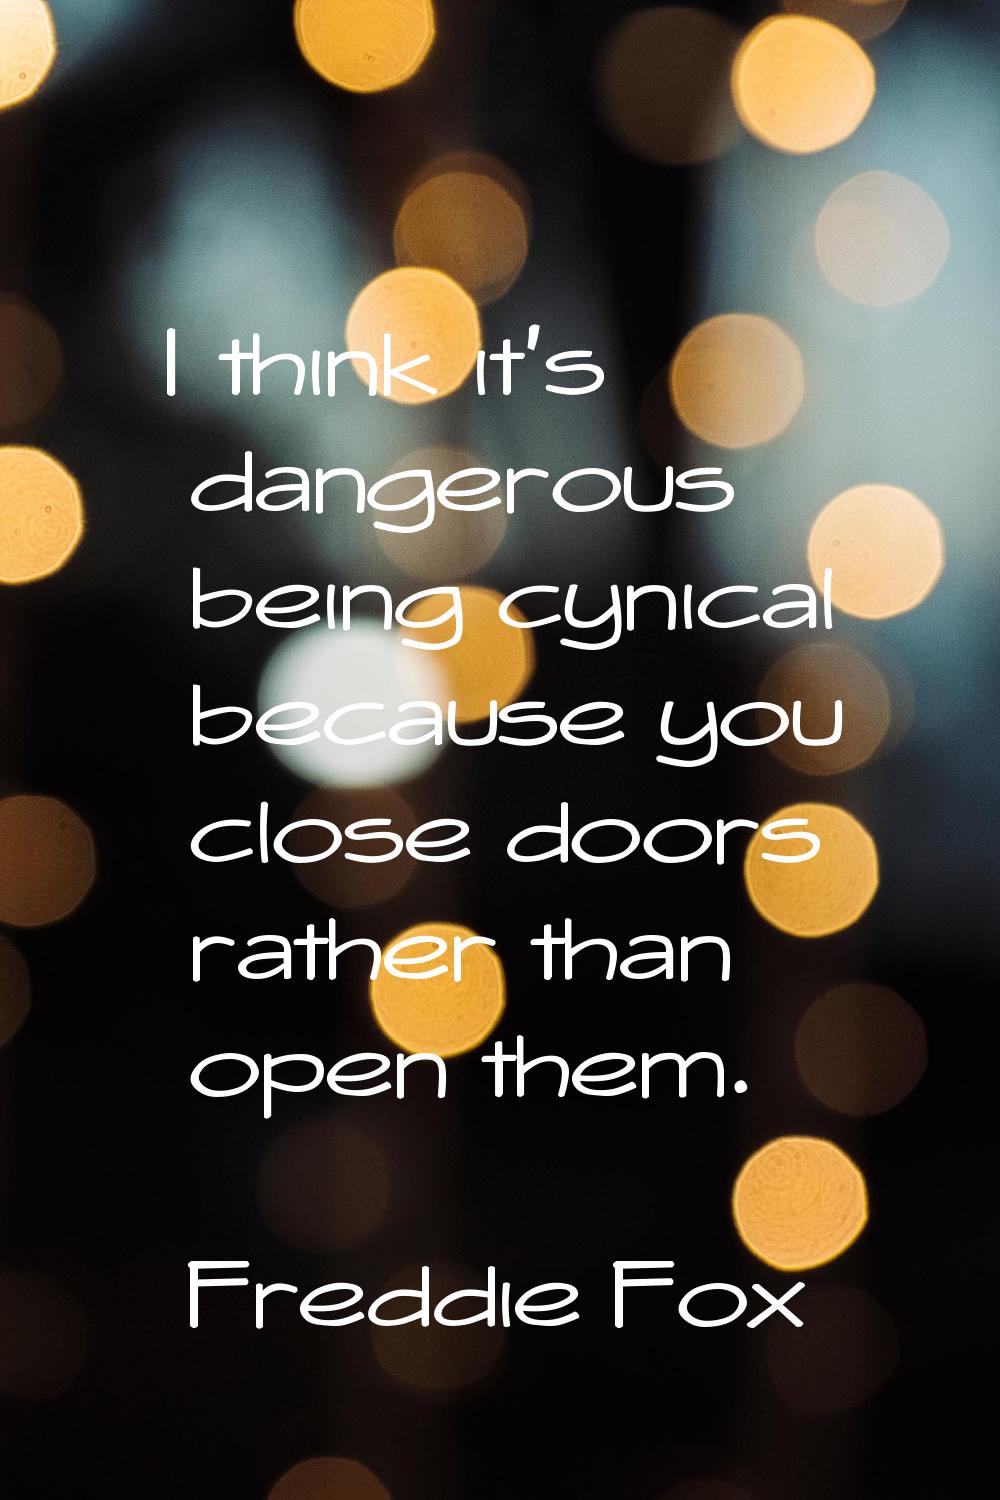 I think it's dangerous being cynical because you close doors rather than open them.